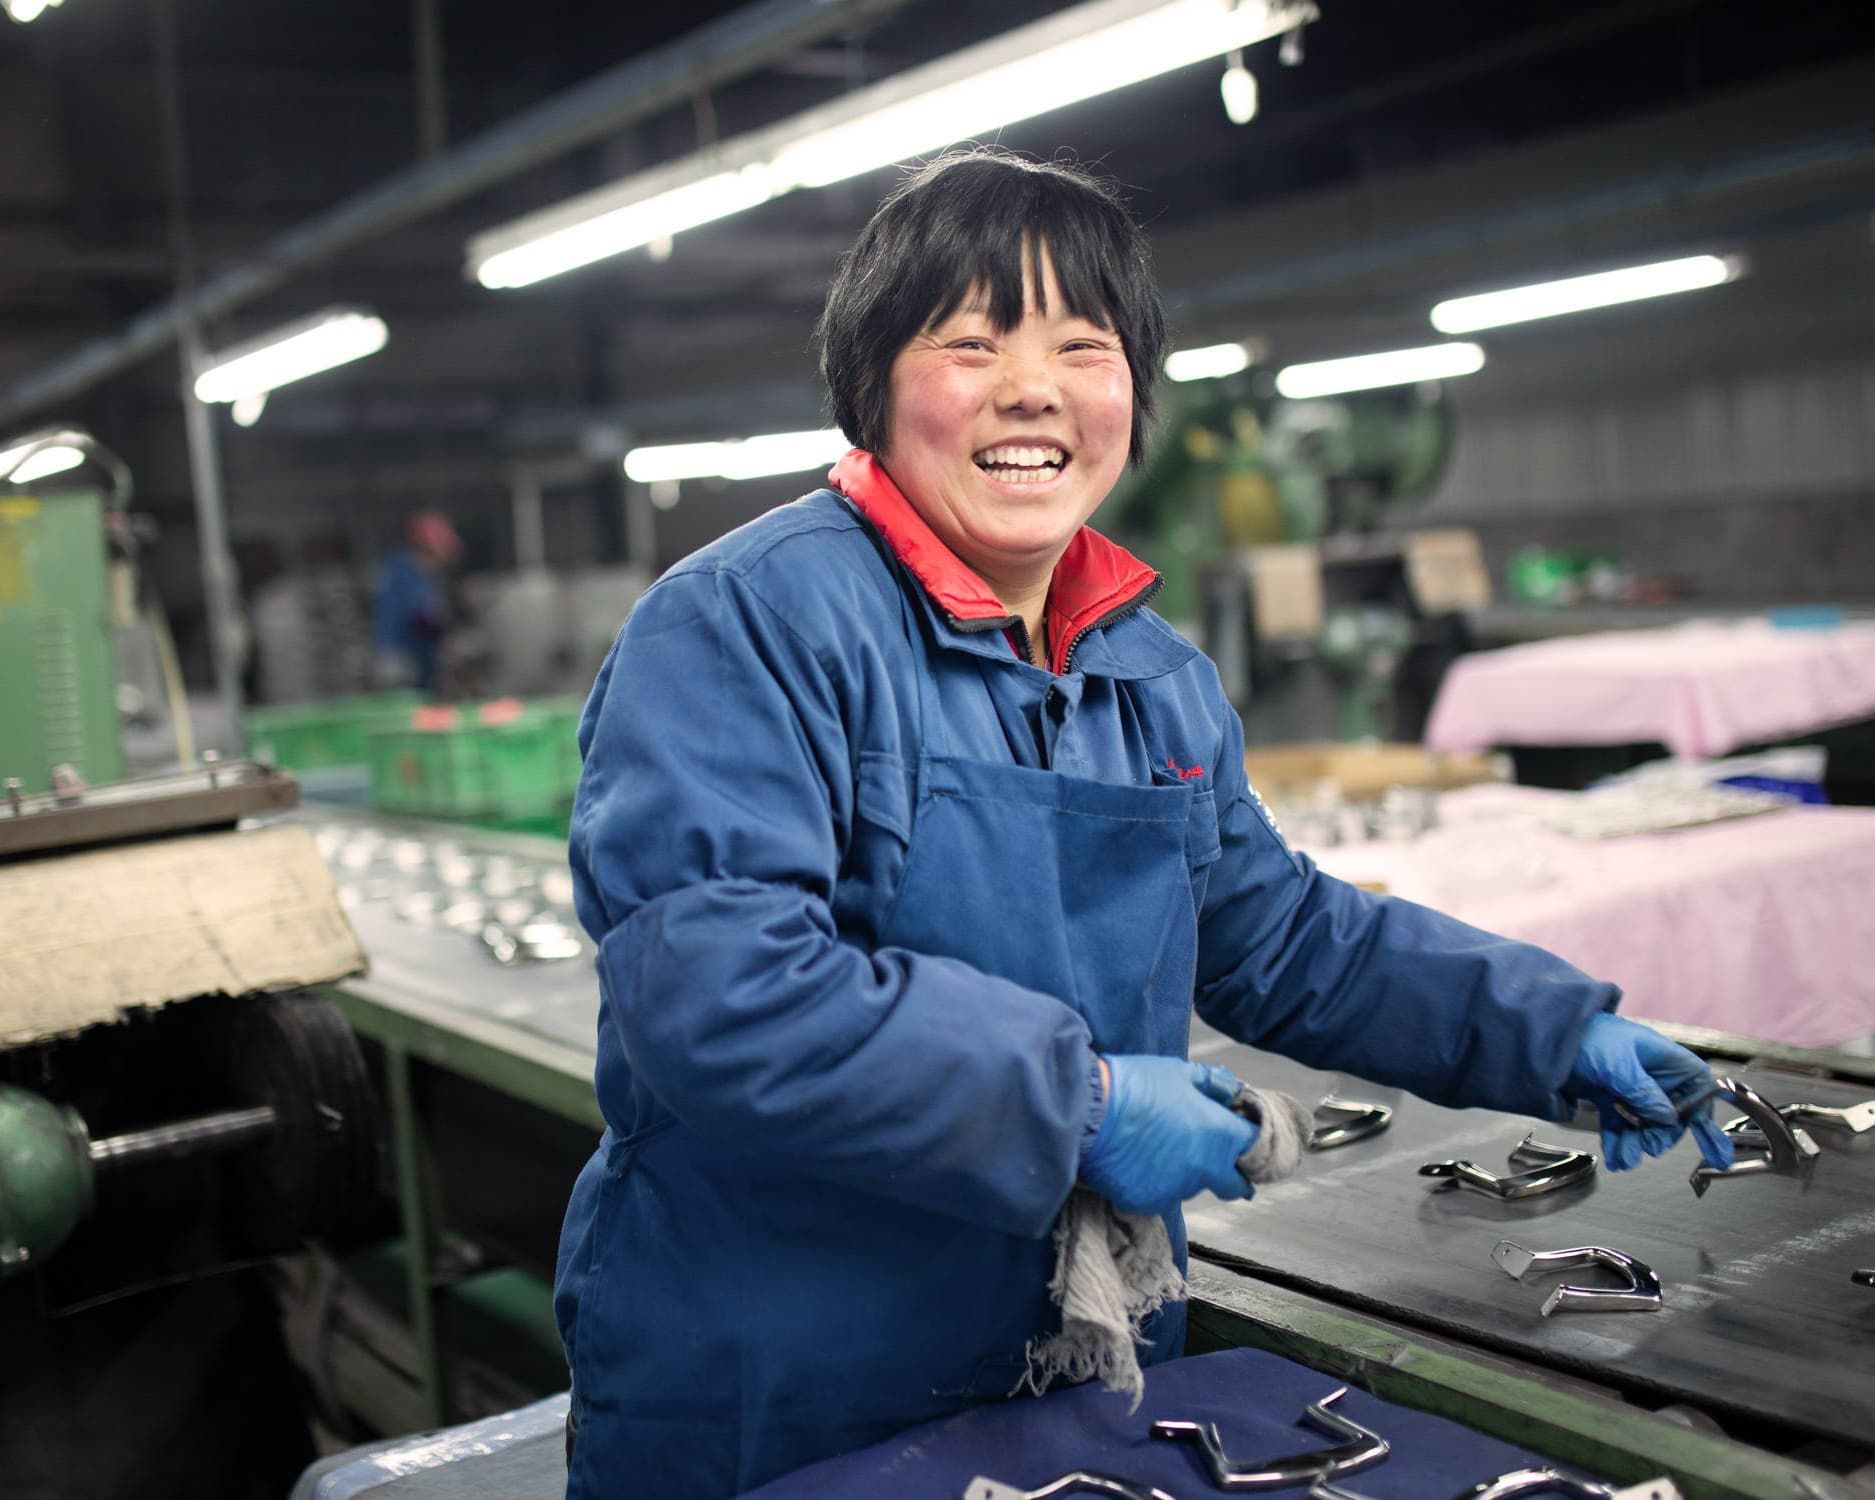 Laughing employee of Guanhua (producer of Olav pans)